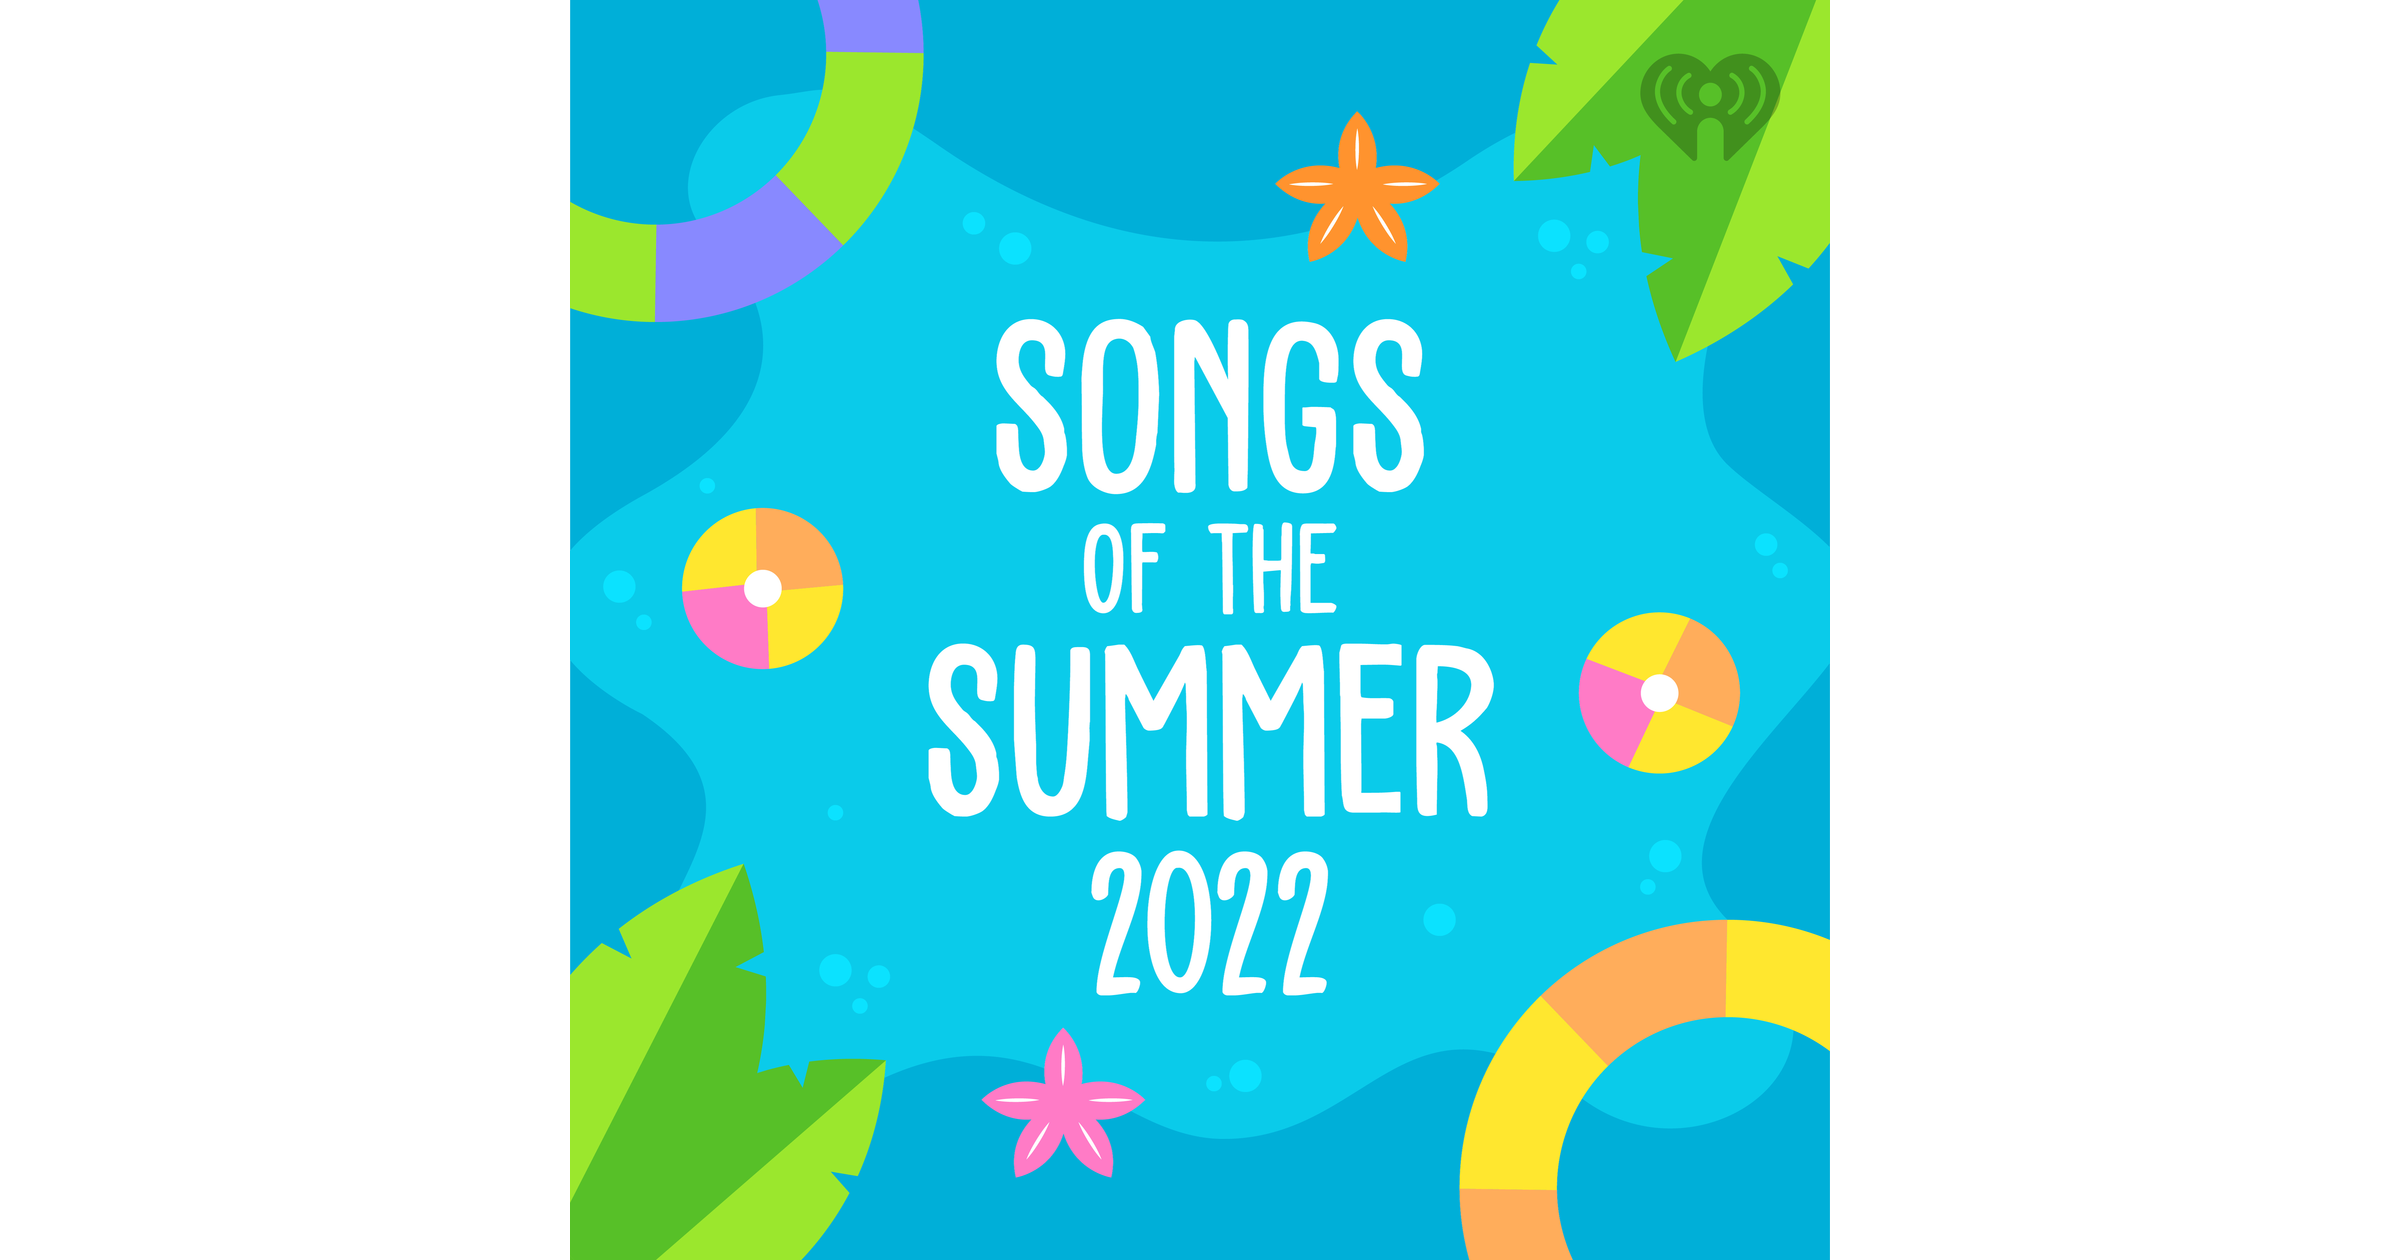 Songs of the Summer 2022 iHeart